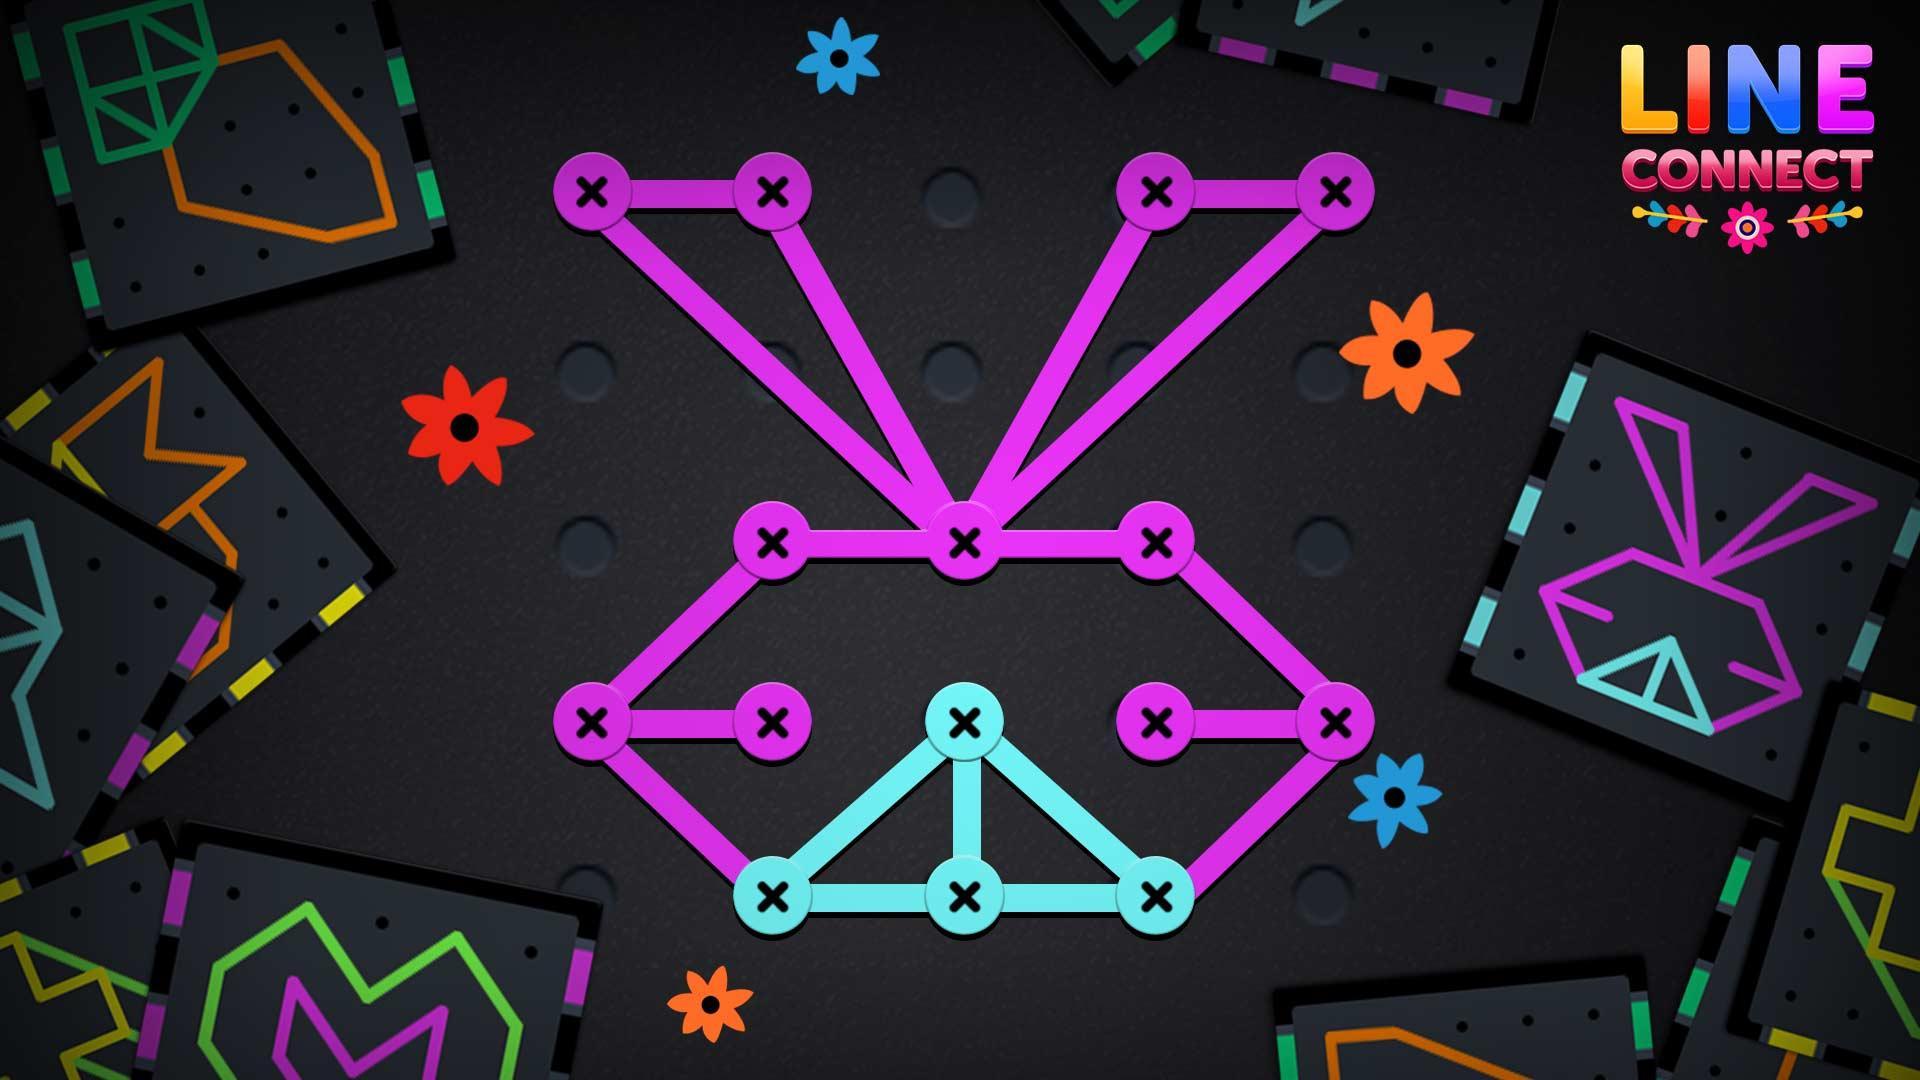 Game is connected. Connected игра. One line game. Connect game. Connect lines.